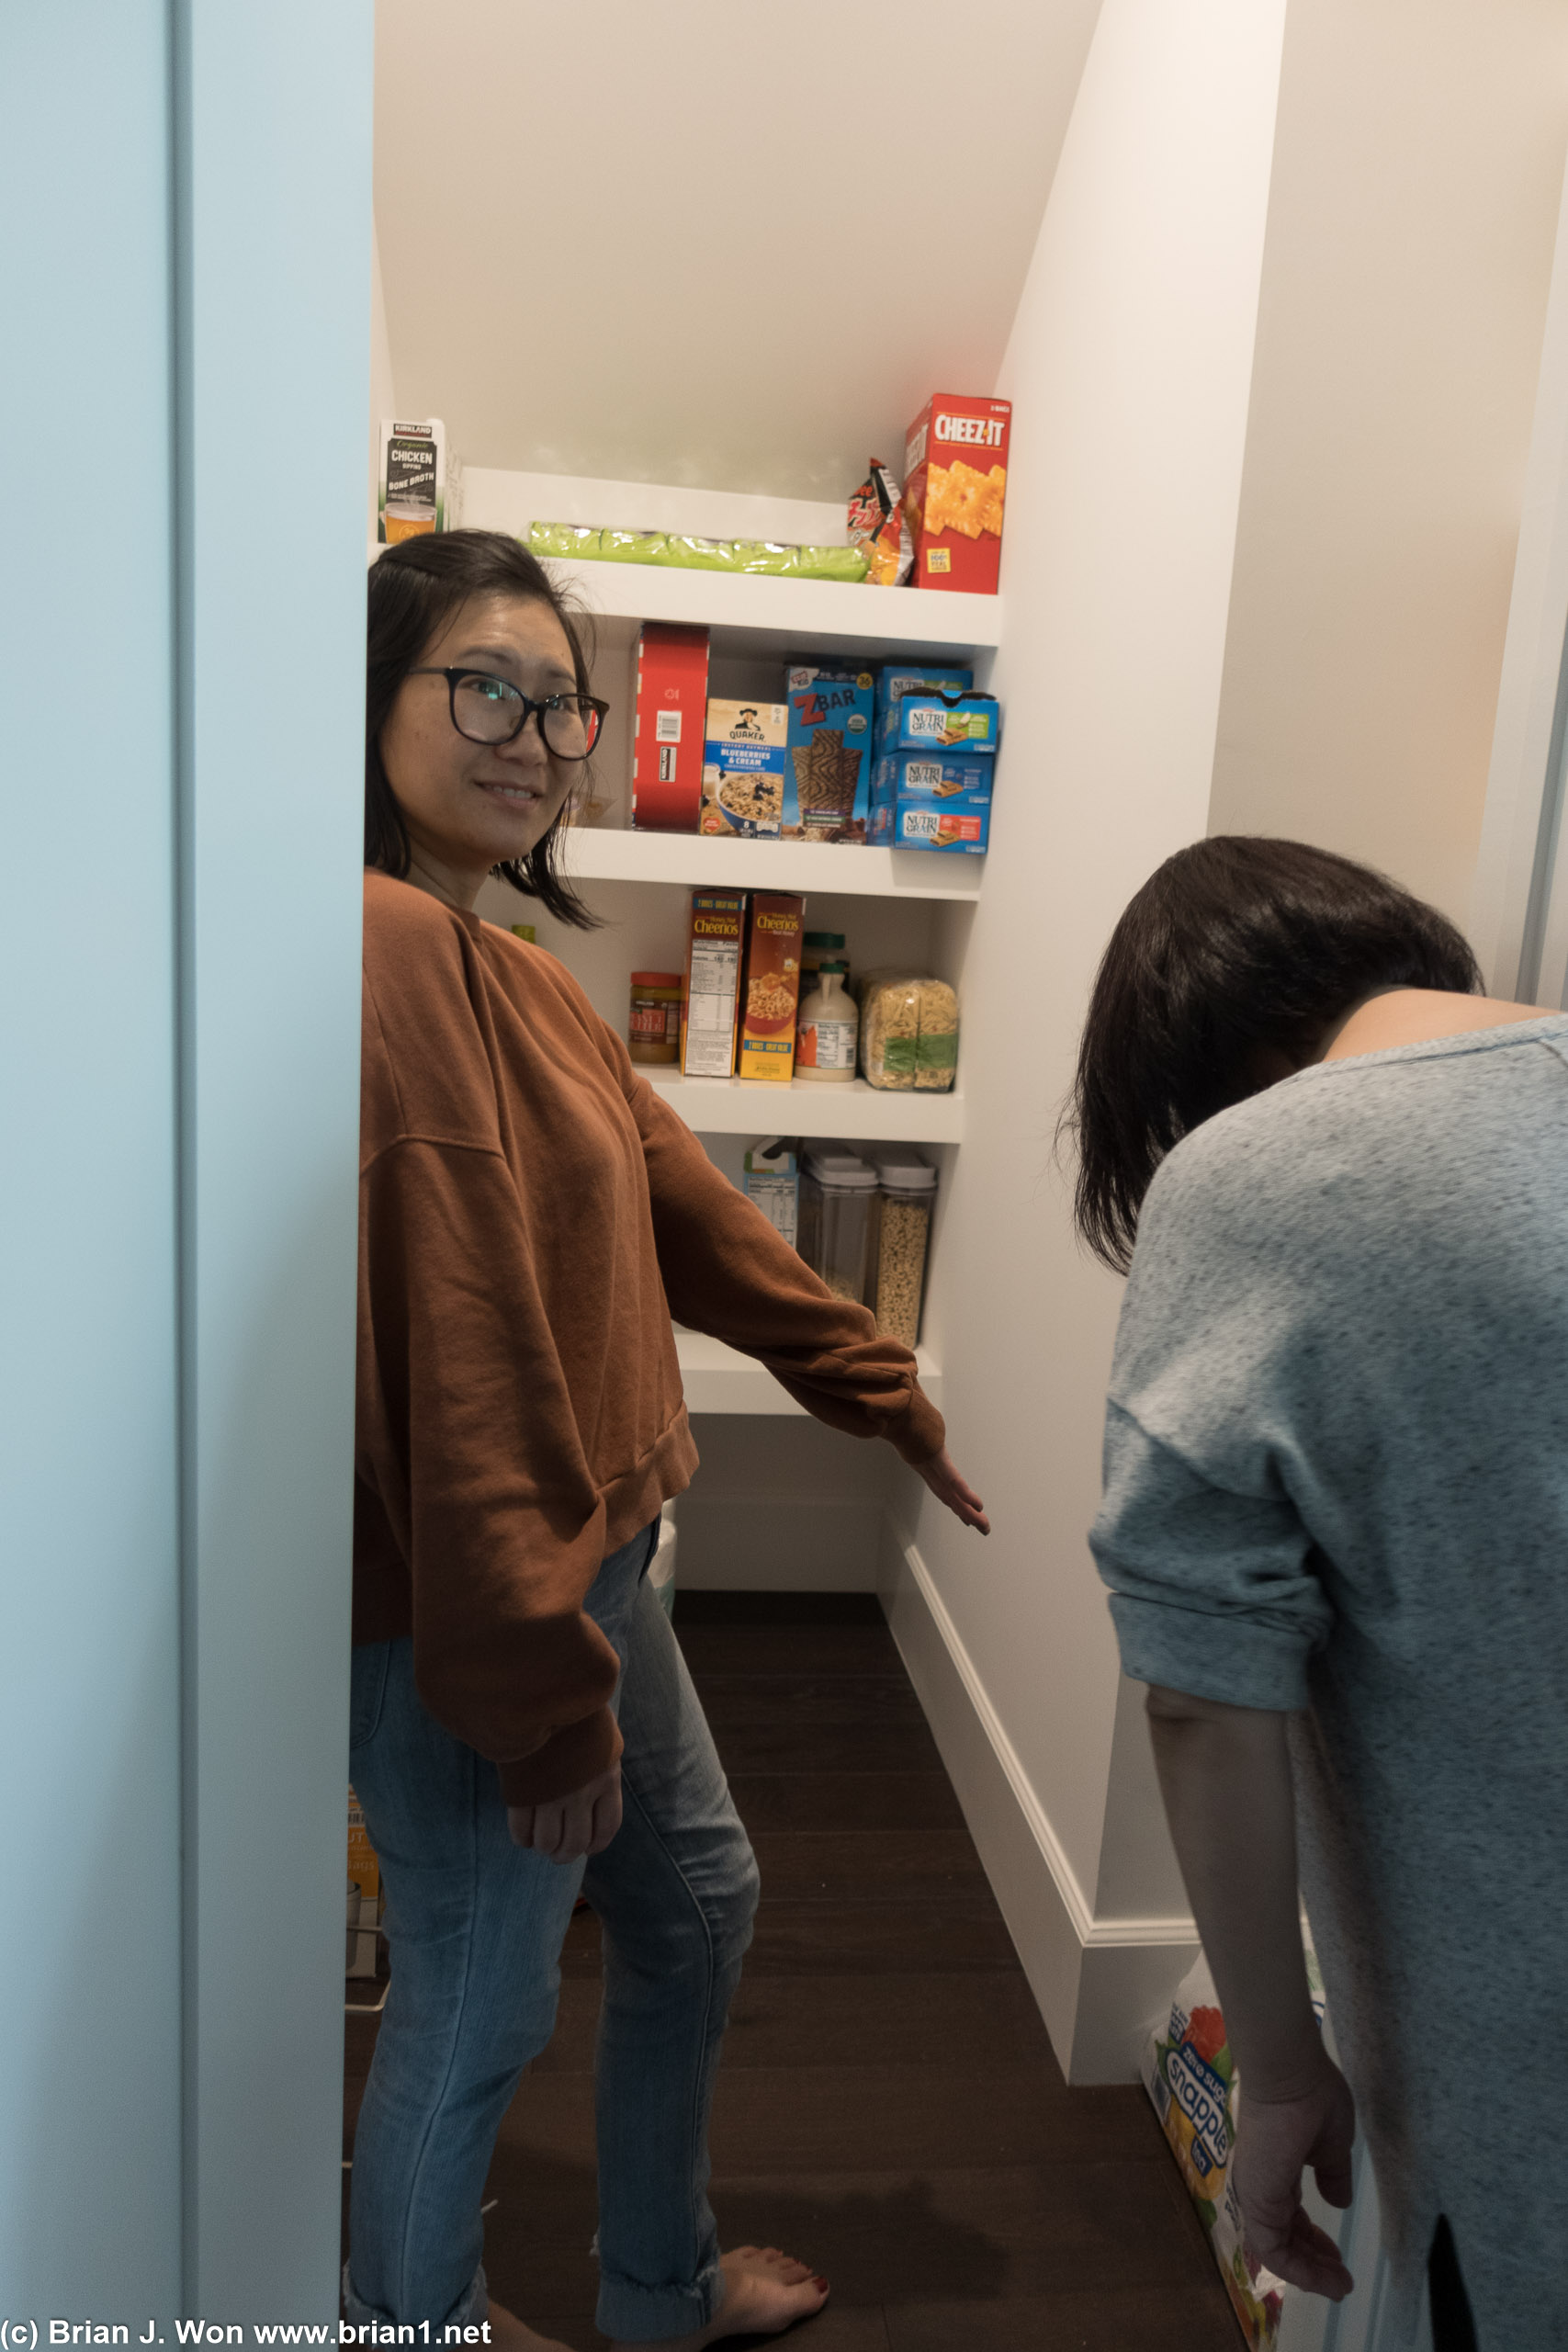 Showing off 4M's new pantry.